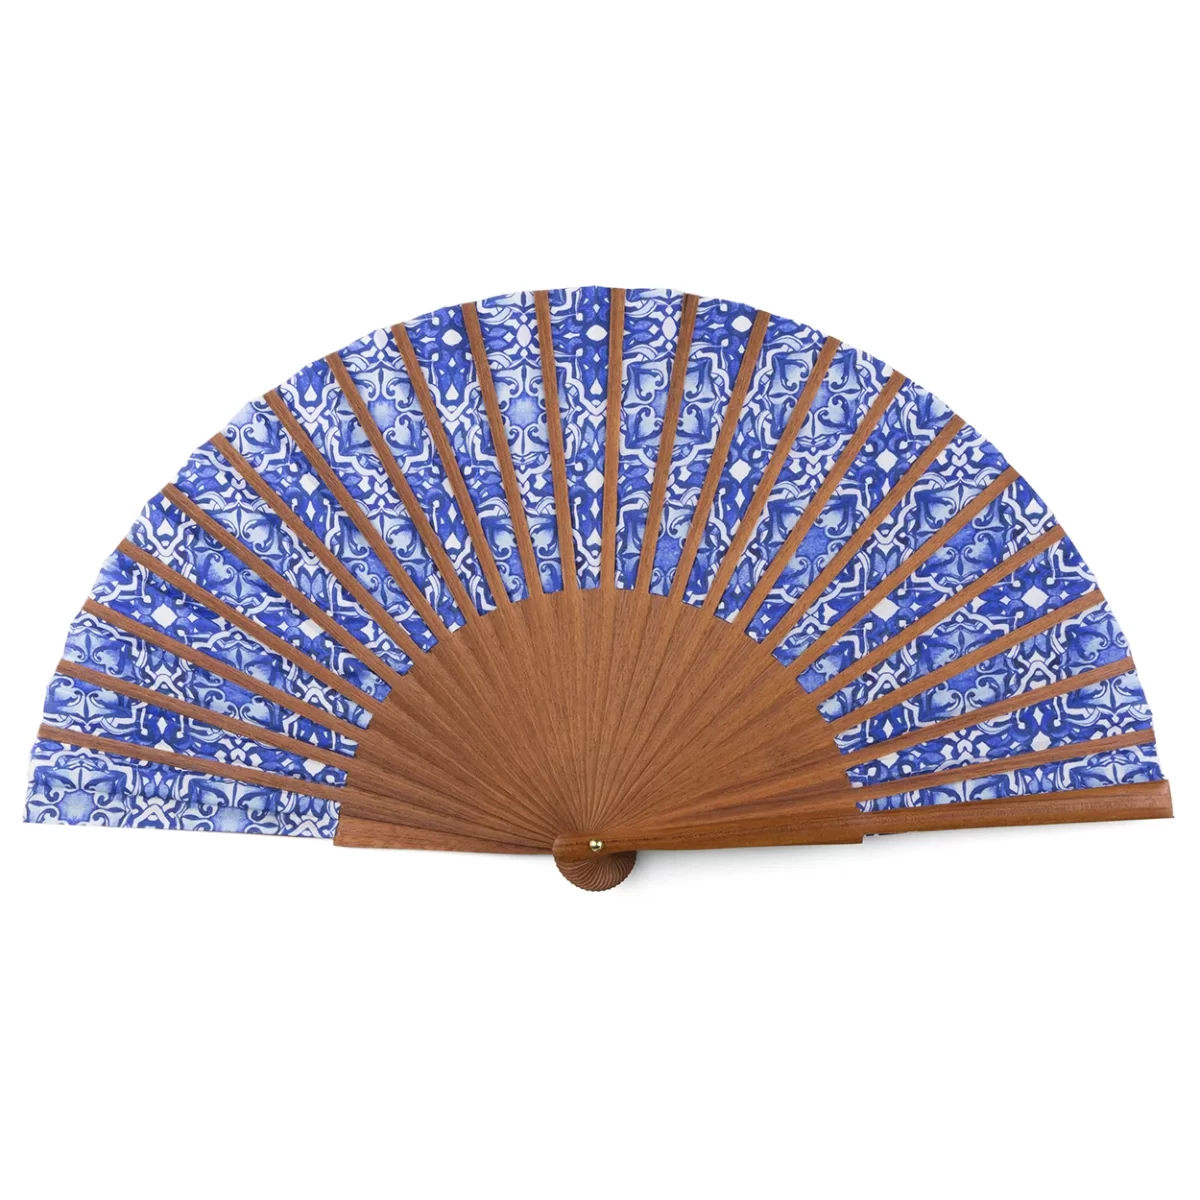 Back side of a blue and white fan with bocapi wood ribs.